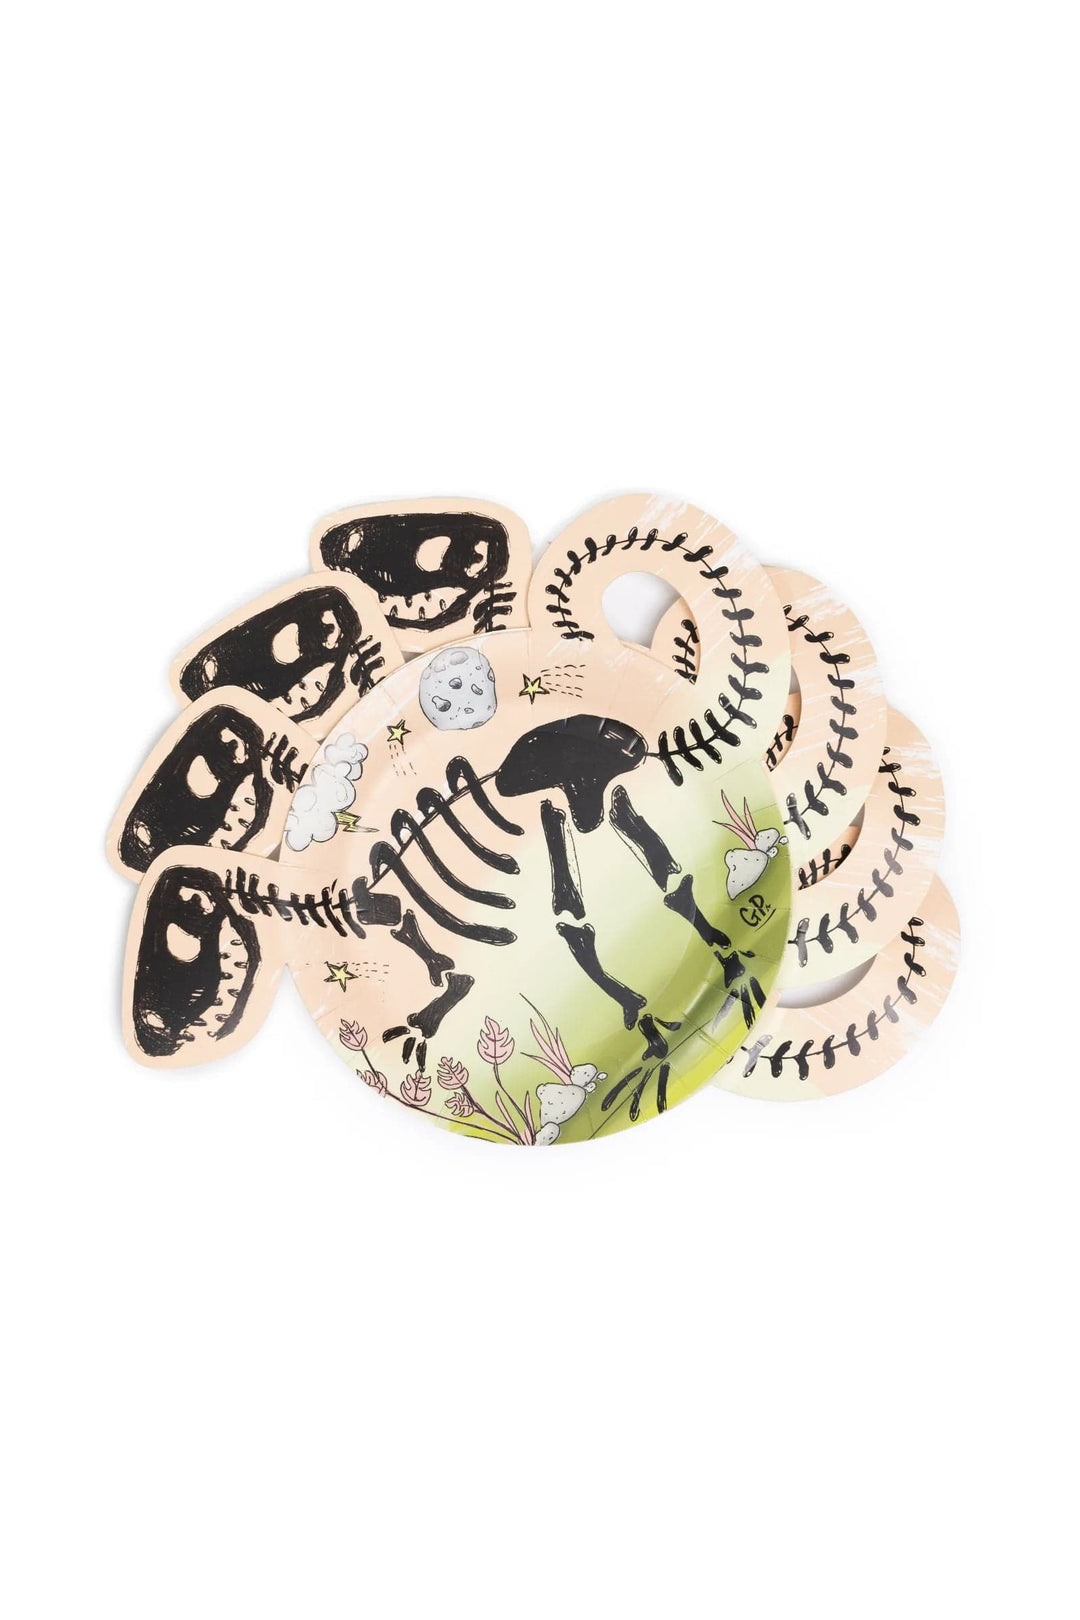 Great Pretenders Party Supplies Dinosaur Party Plates - Small